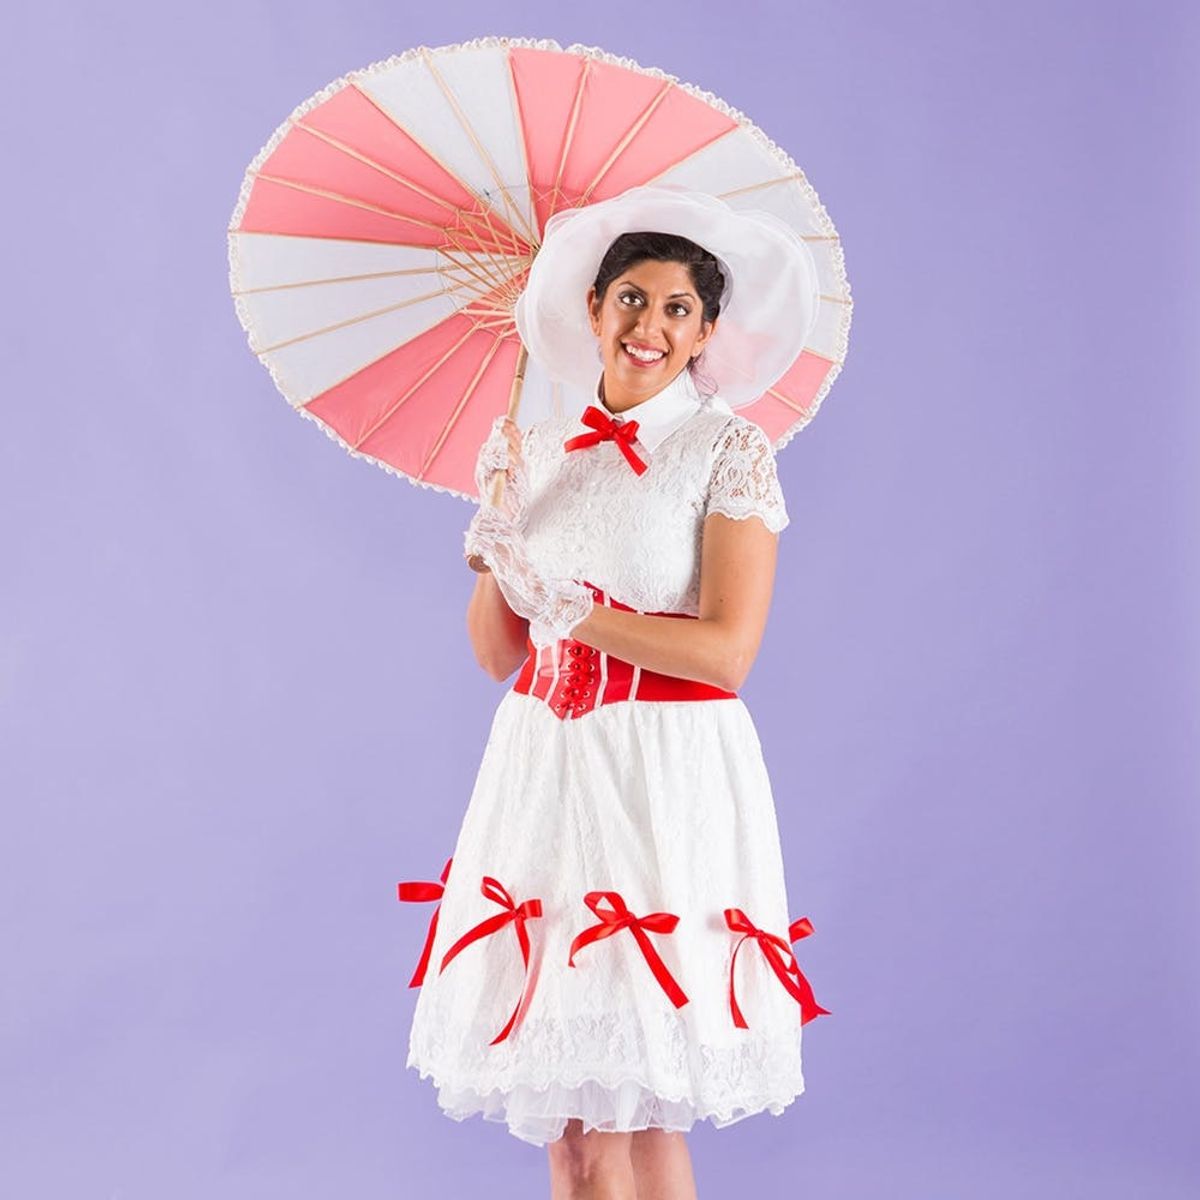 This Mary Poppins Costume Makes for a Practically Perfect Halloween